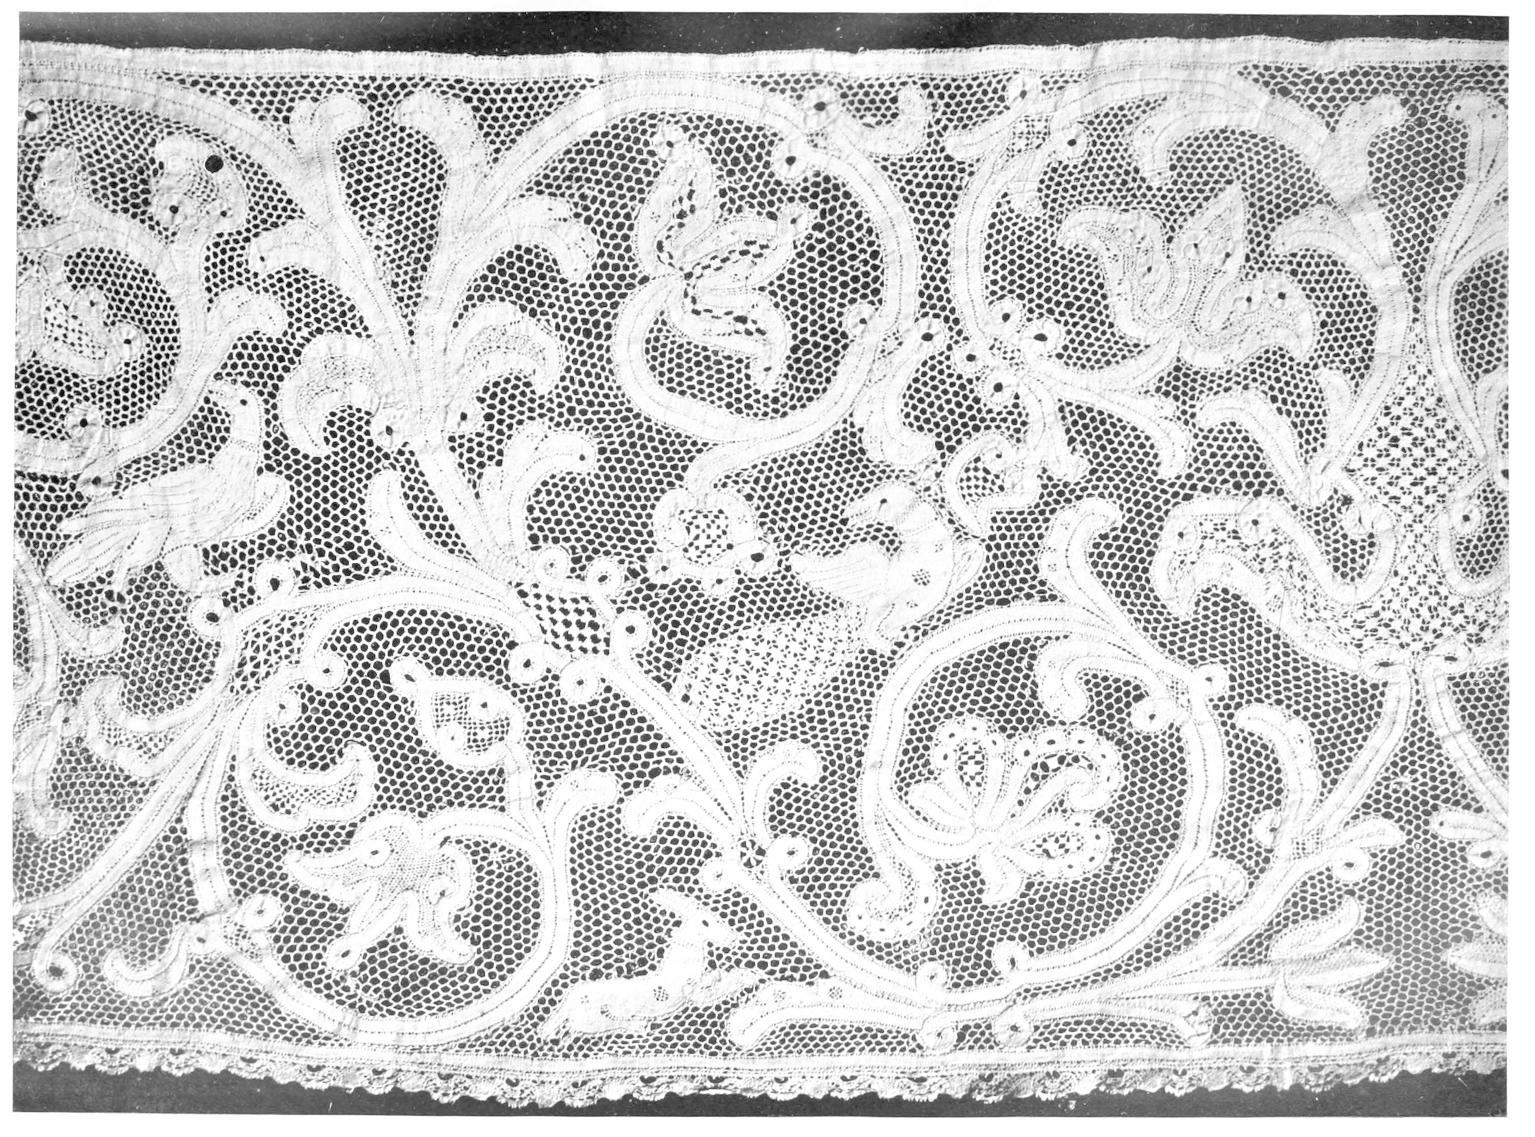 Black and White Venise Lace Trim by the Yard, 22 Mm Scalloped Lace Trim,  Spider Web Lace Trim 